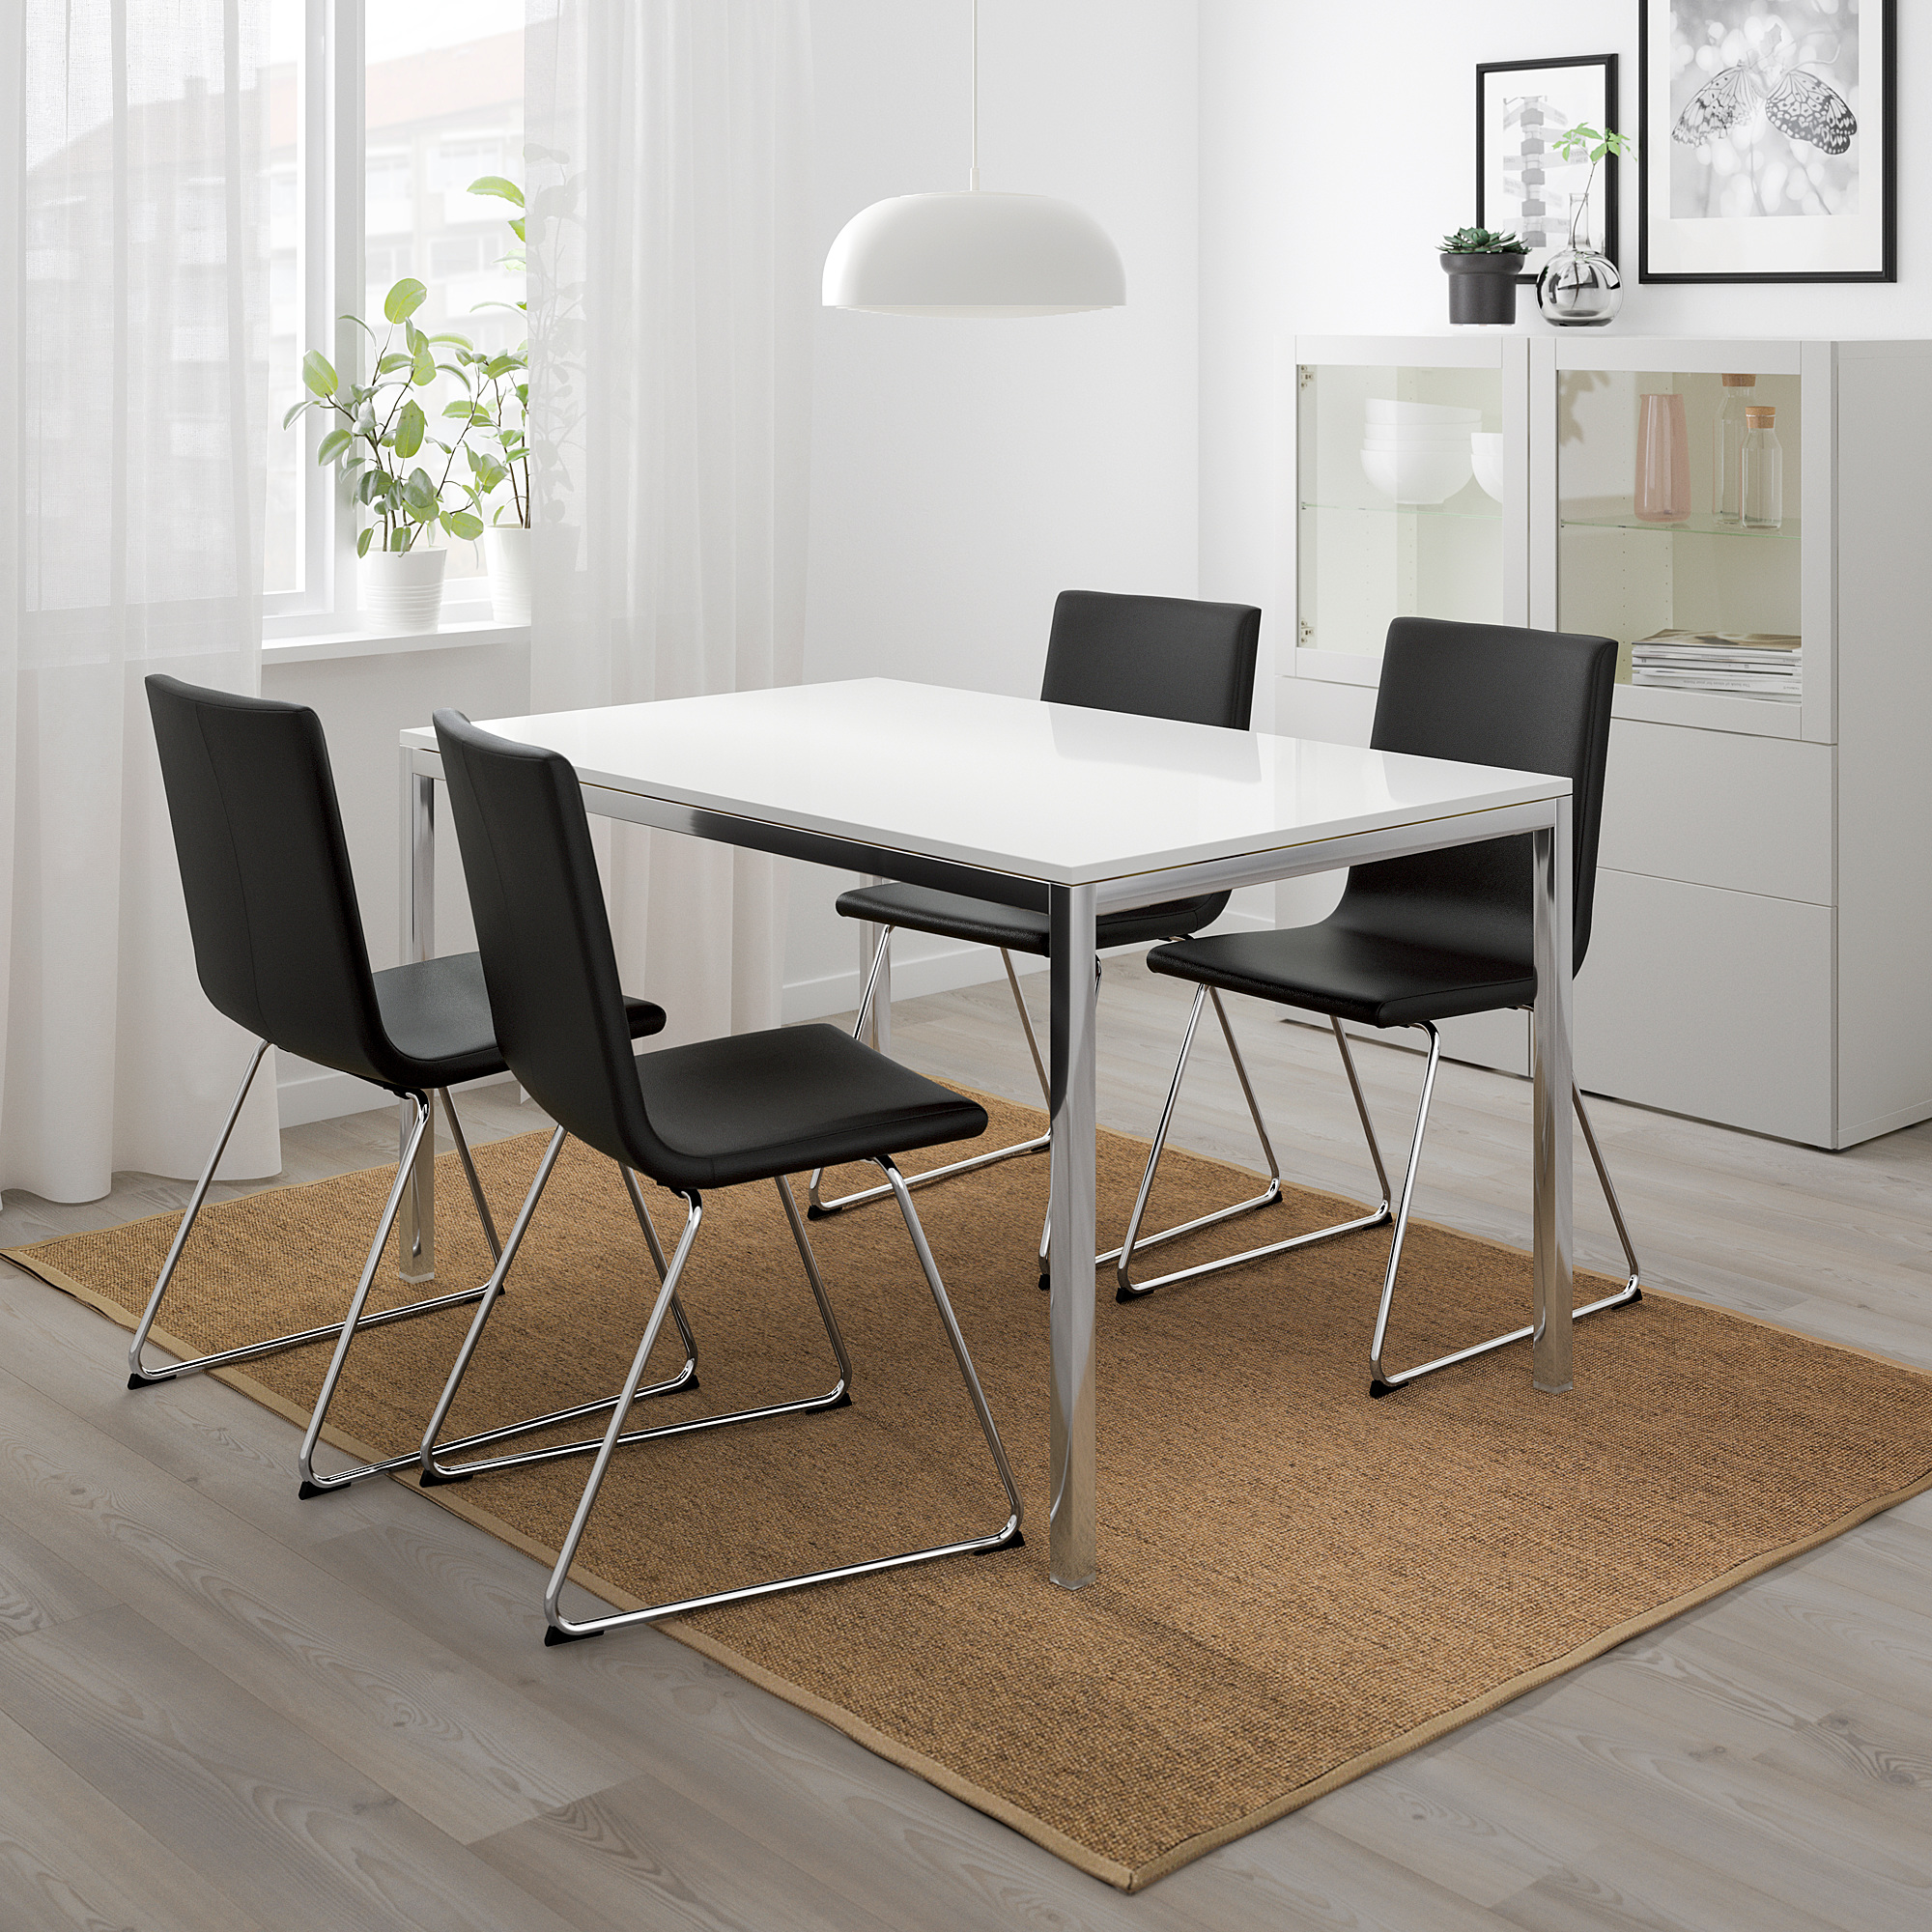 TORSBY table